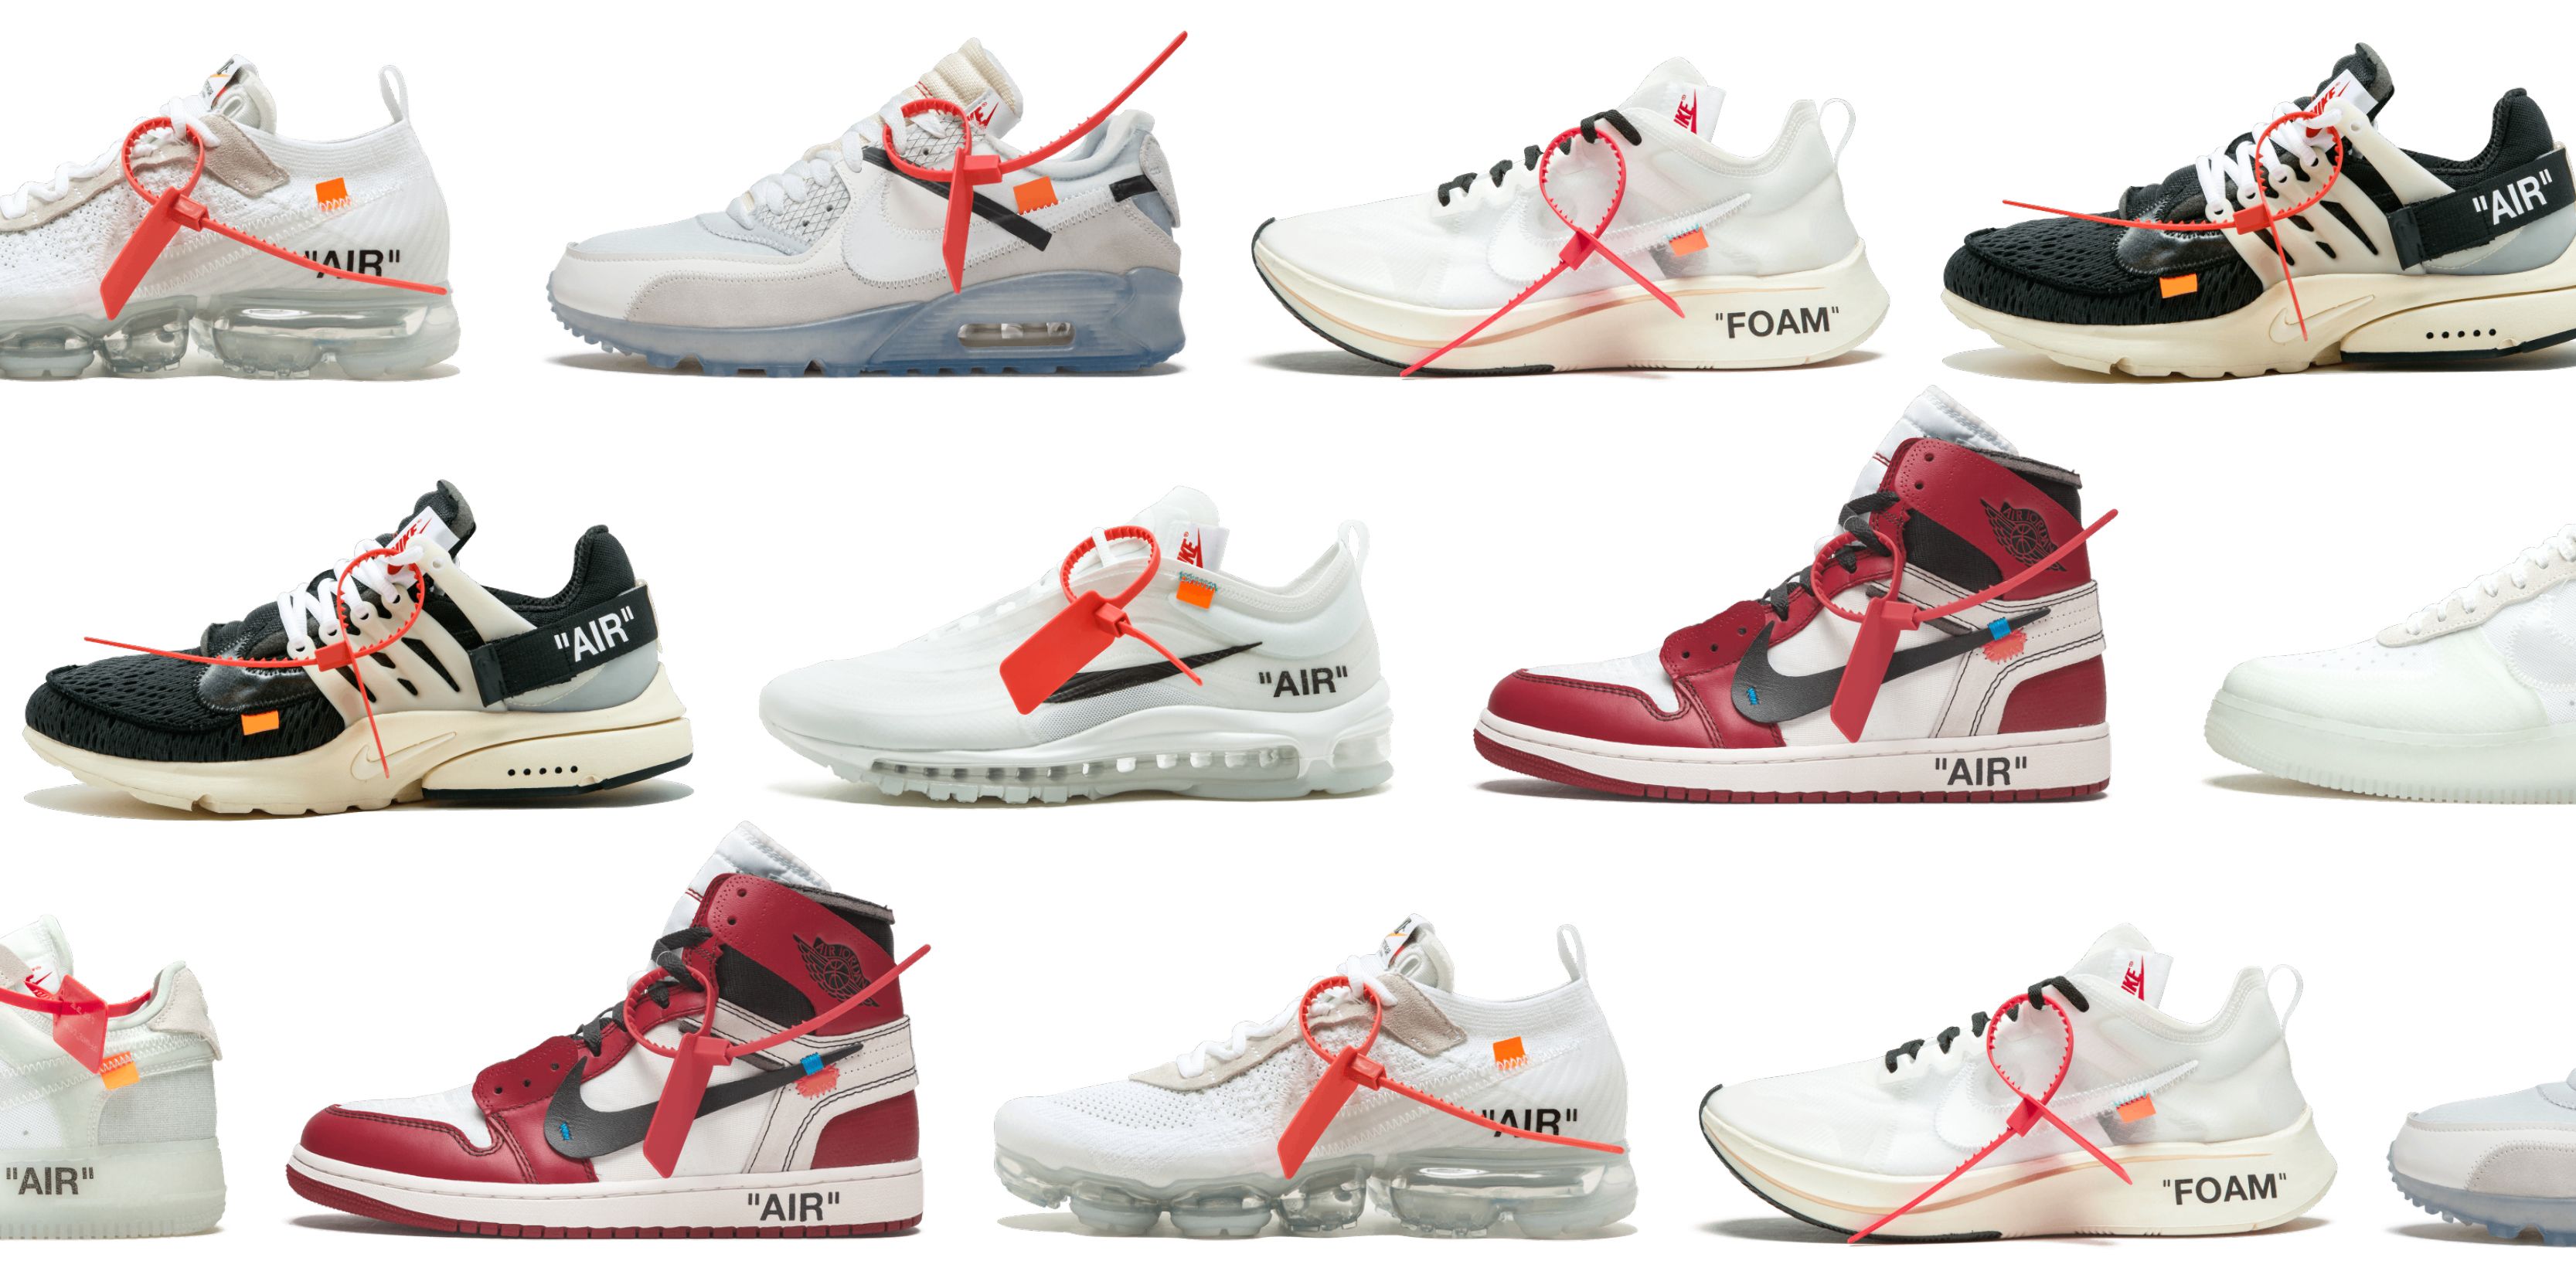 Best Nike Off-White Shoes | Nike Releases 2019